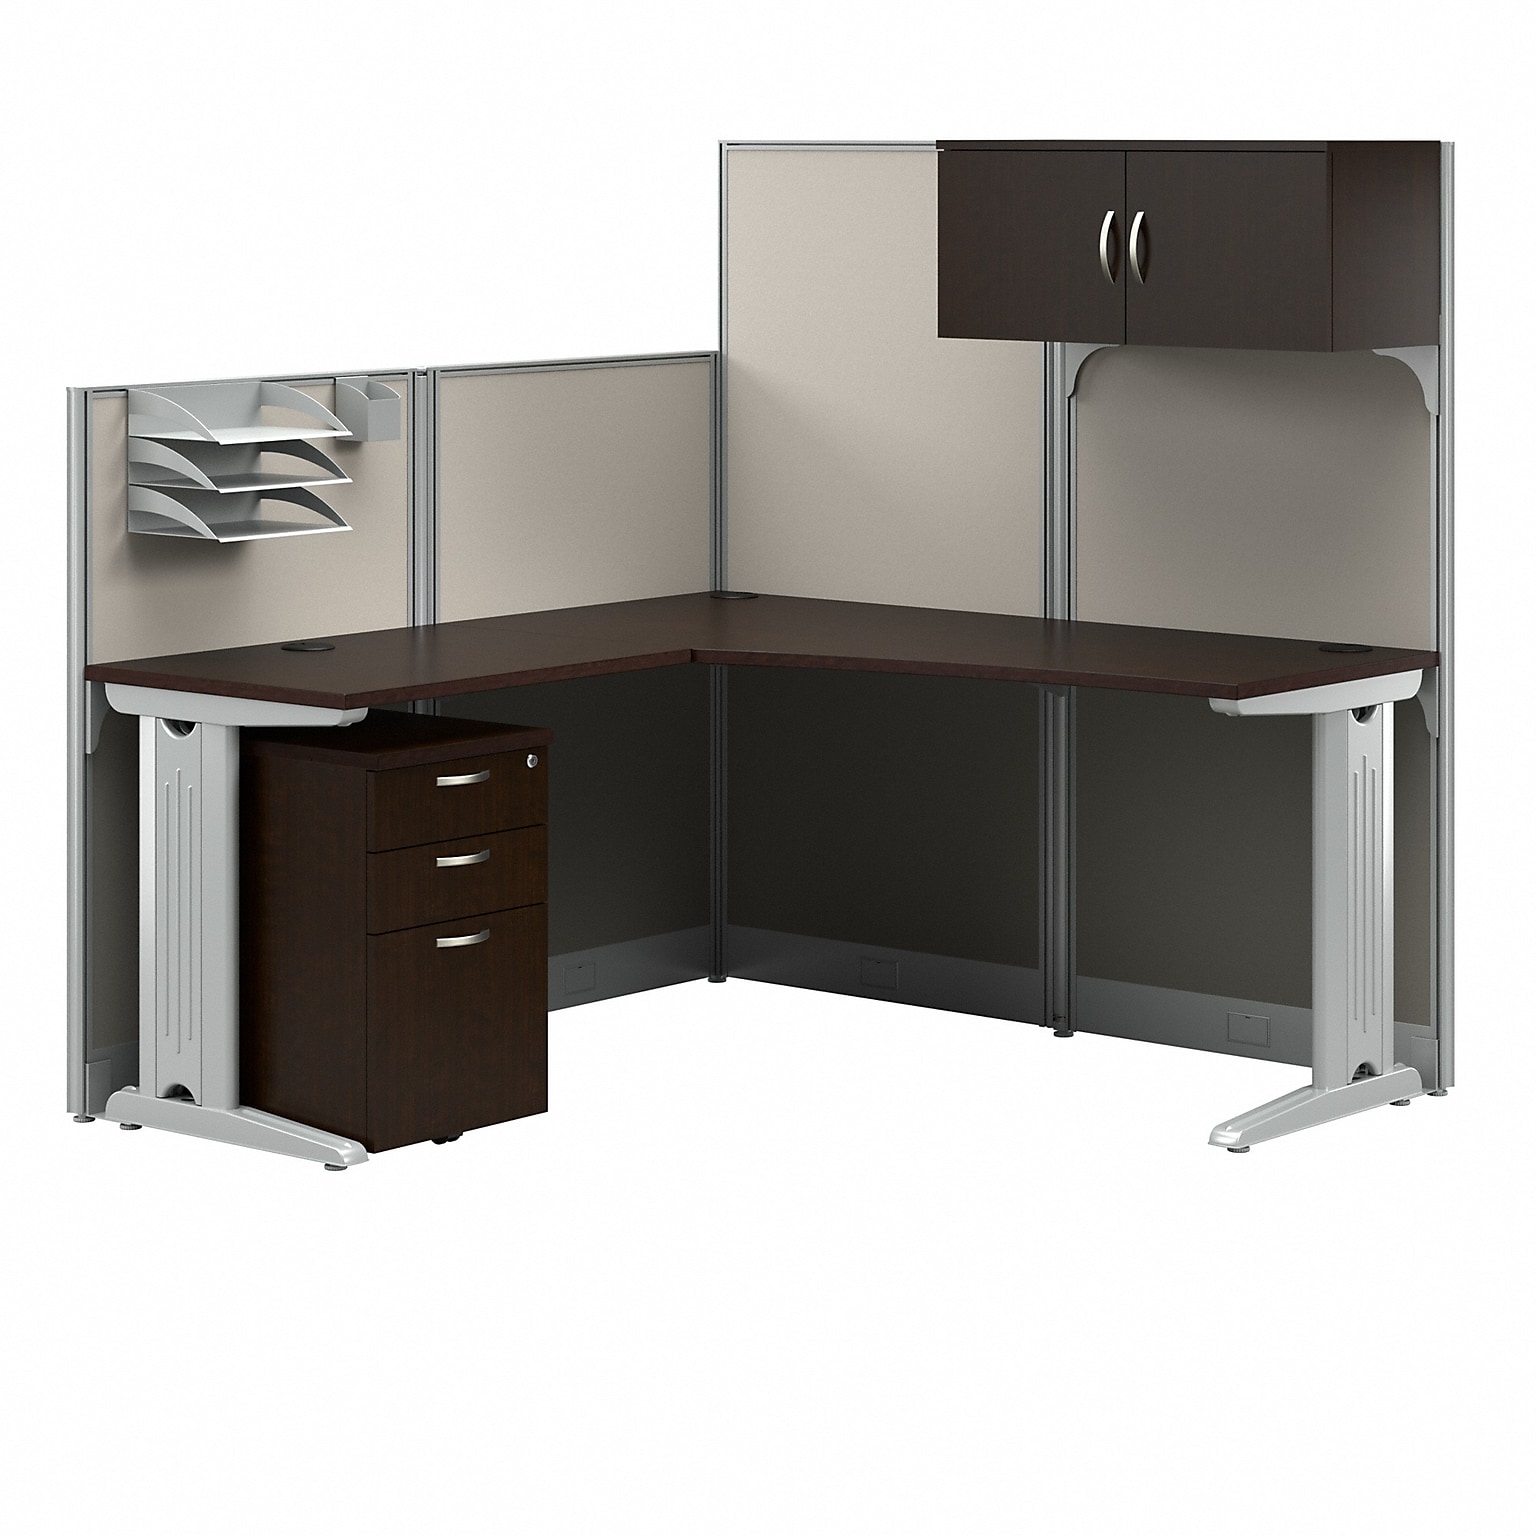 Bush Business Furniture Office in an Hour 63H x 65W L-Shaped Cubicle Workstation, Mocha Cherry (WC36894-03STGK)